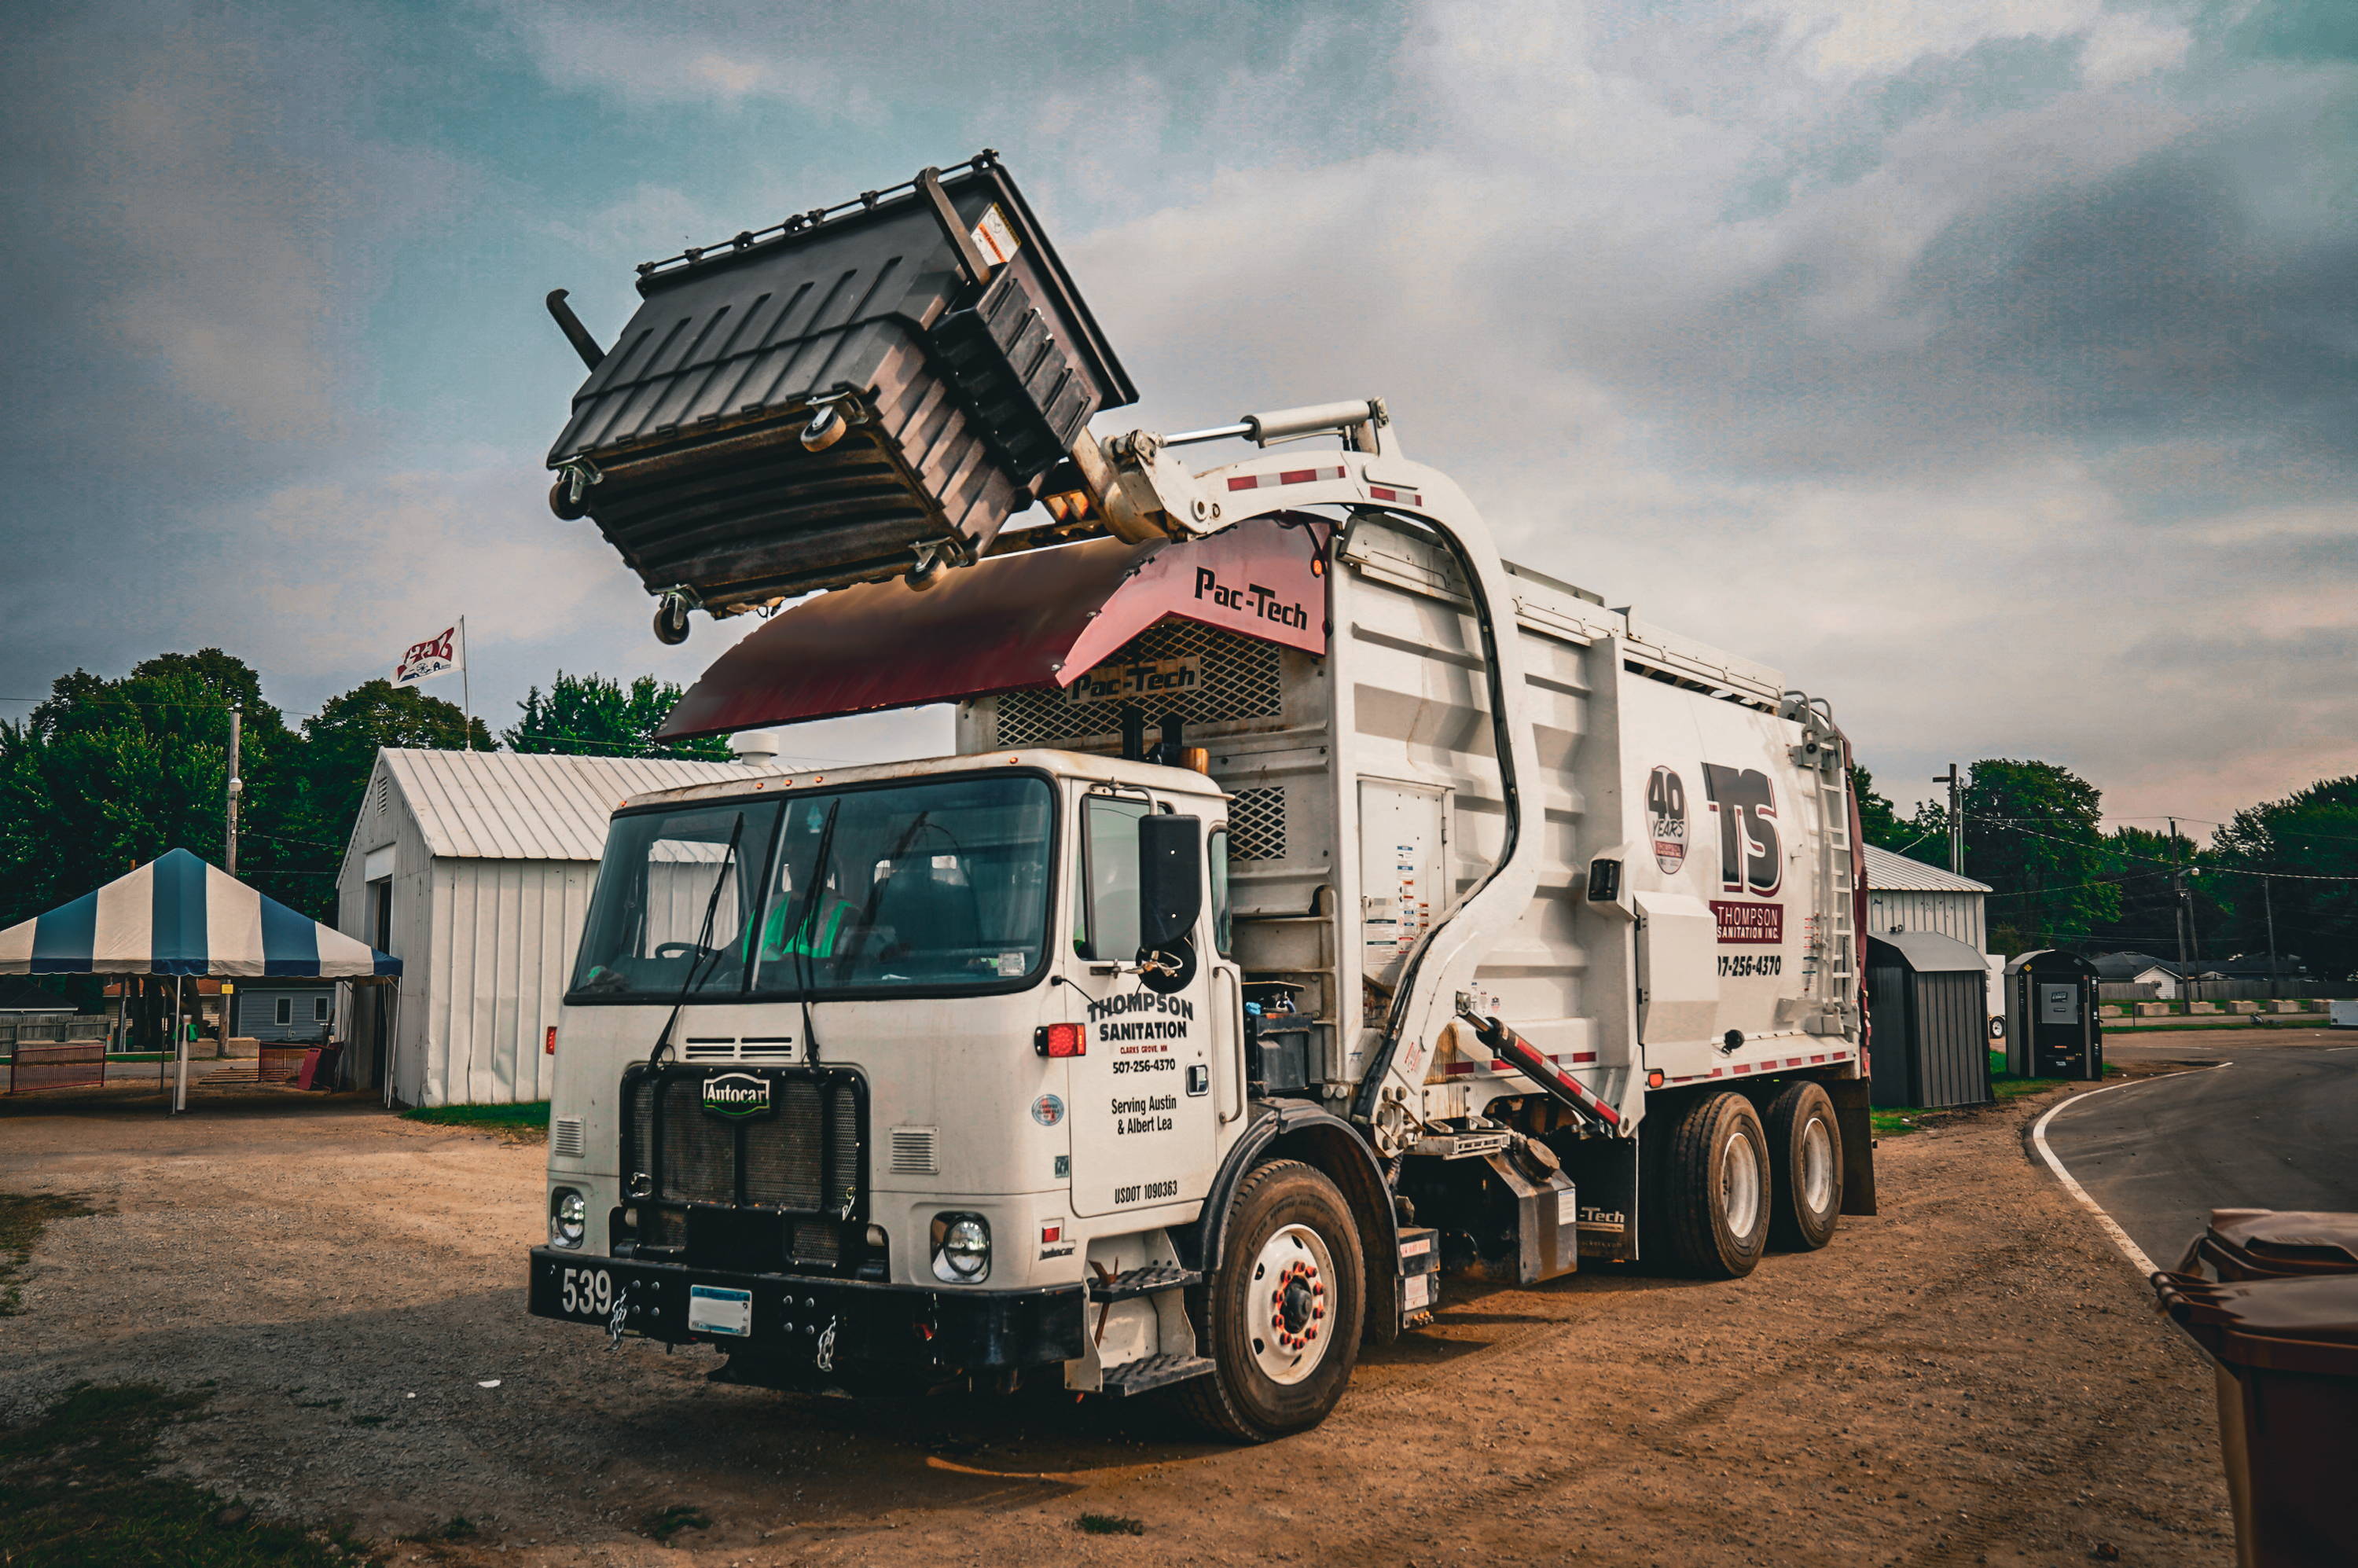 The Ultimate Front Loader Refuse Garbage Truck